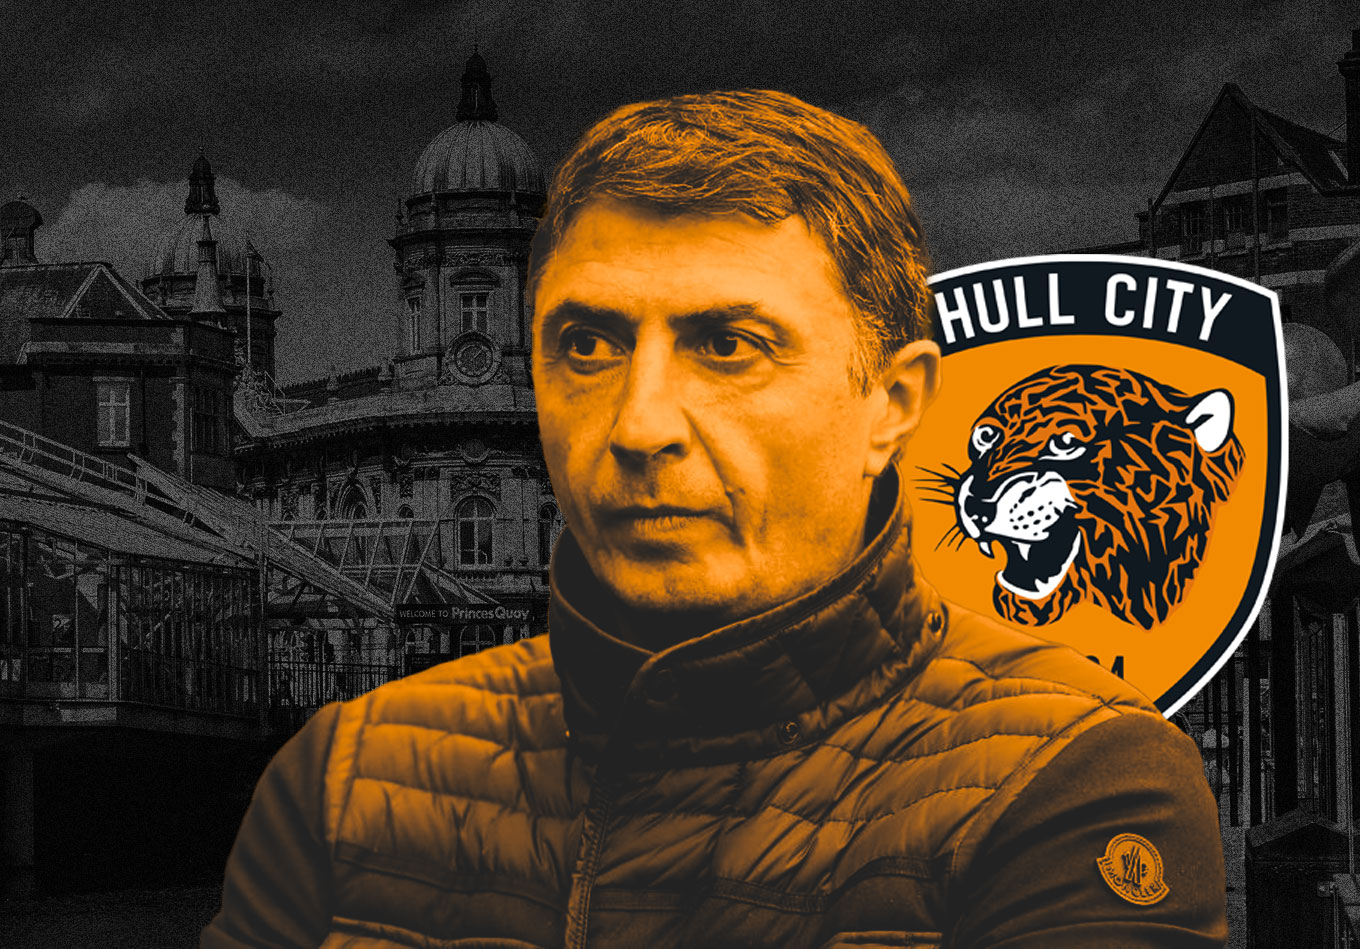 Tiger Kings: Hull City’s Unpredictability an Advantage in 2022-23